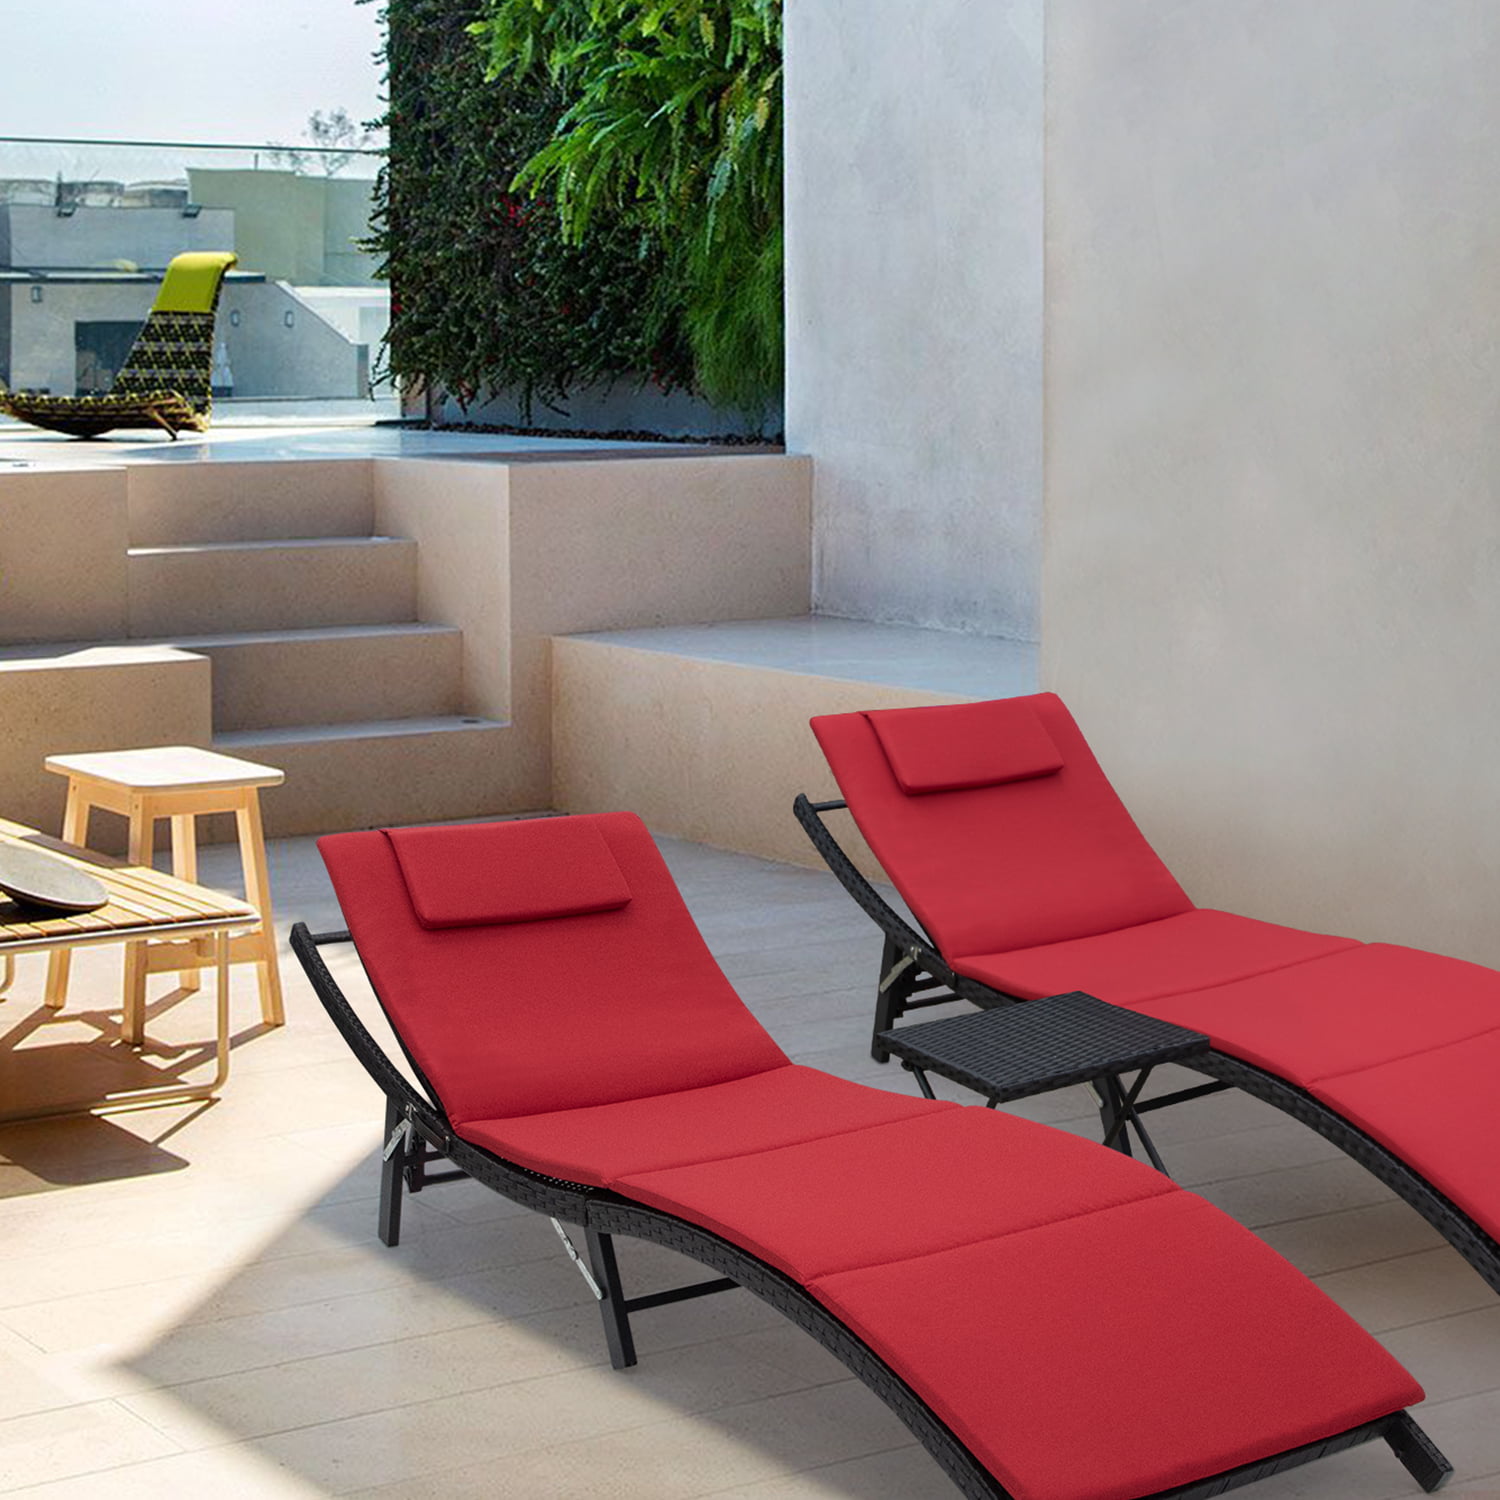 Red Outdoor Lounge Chair ~ fluxdesignhouse